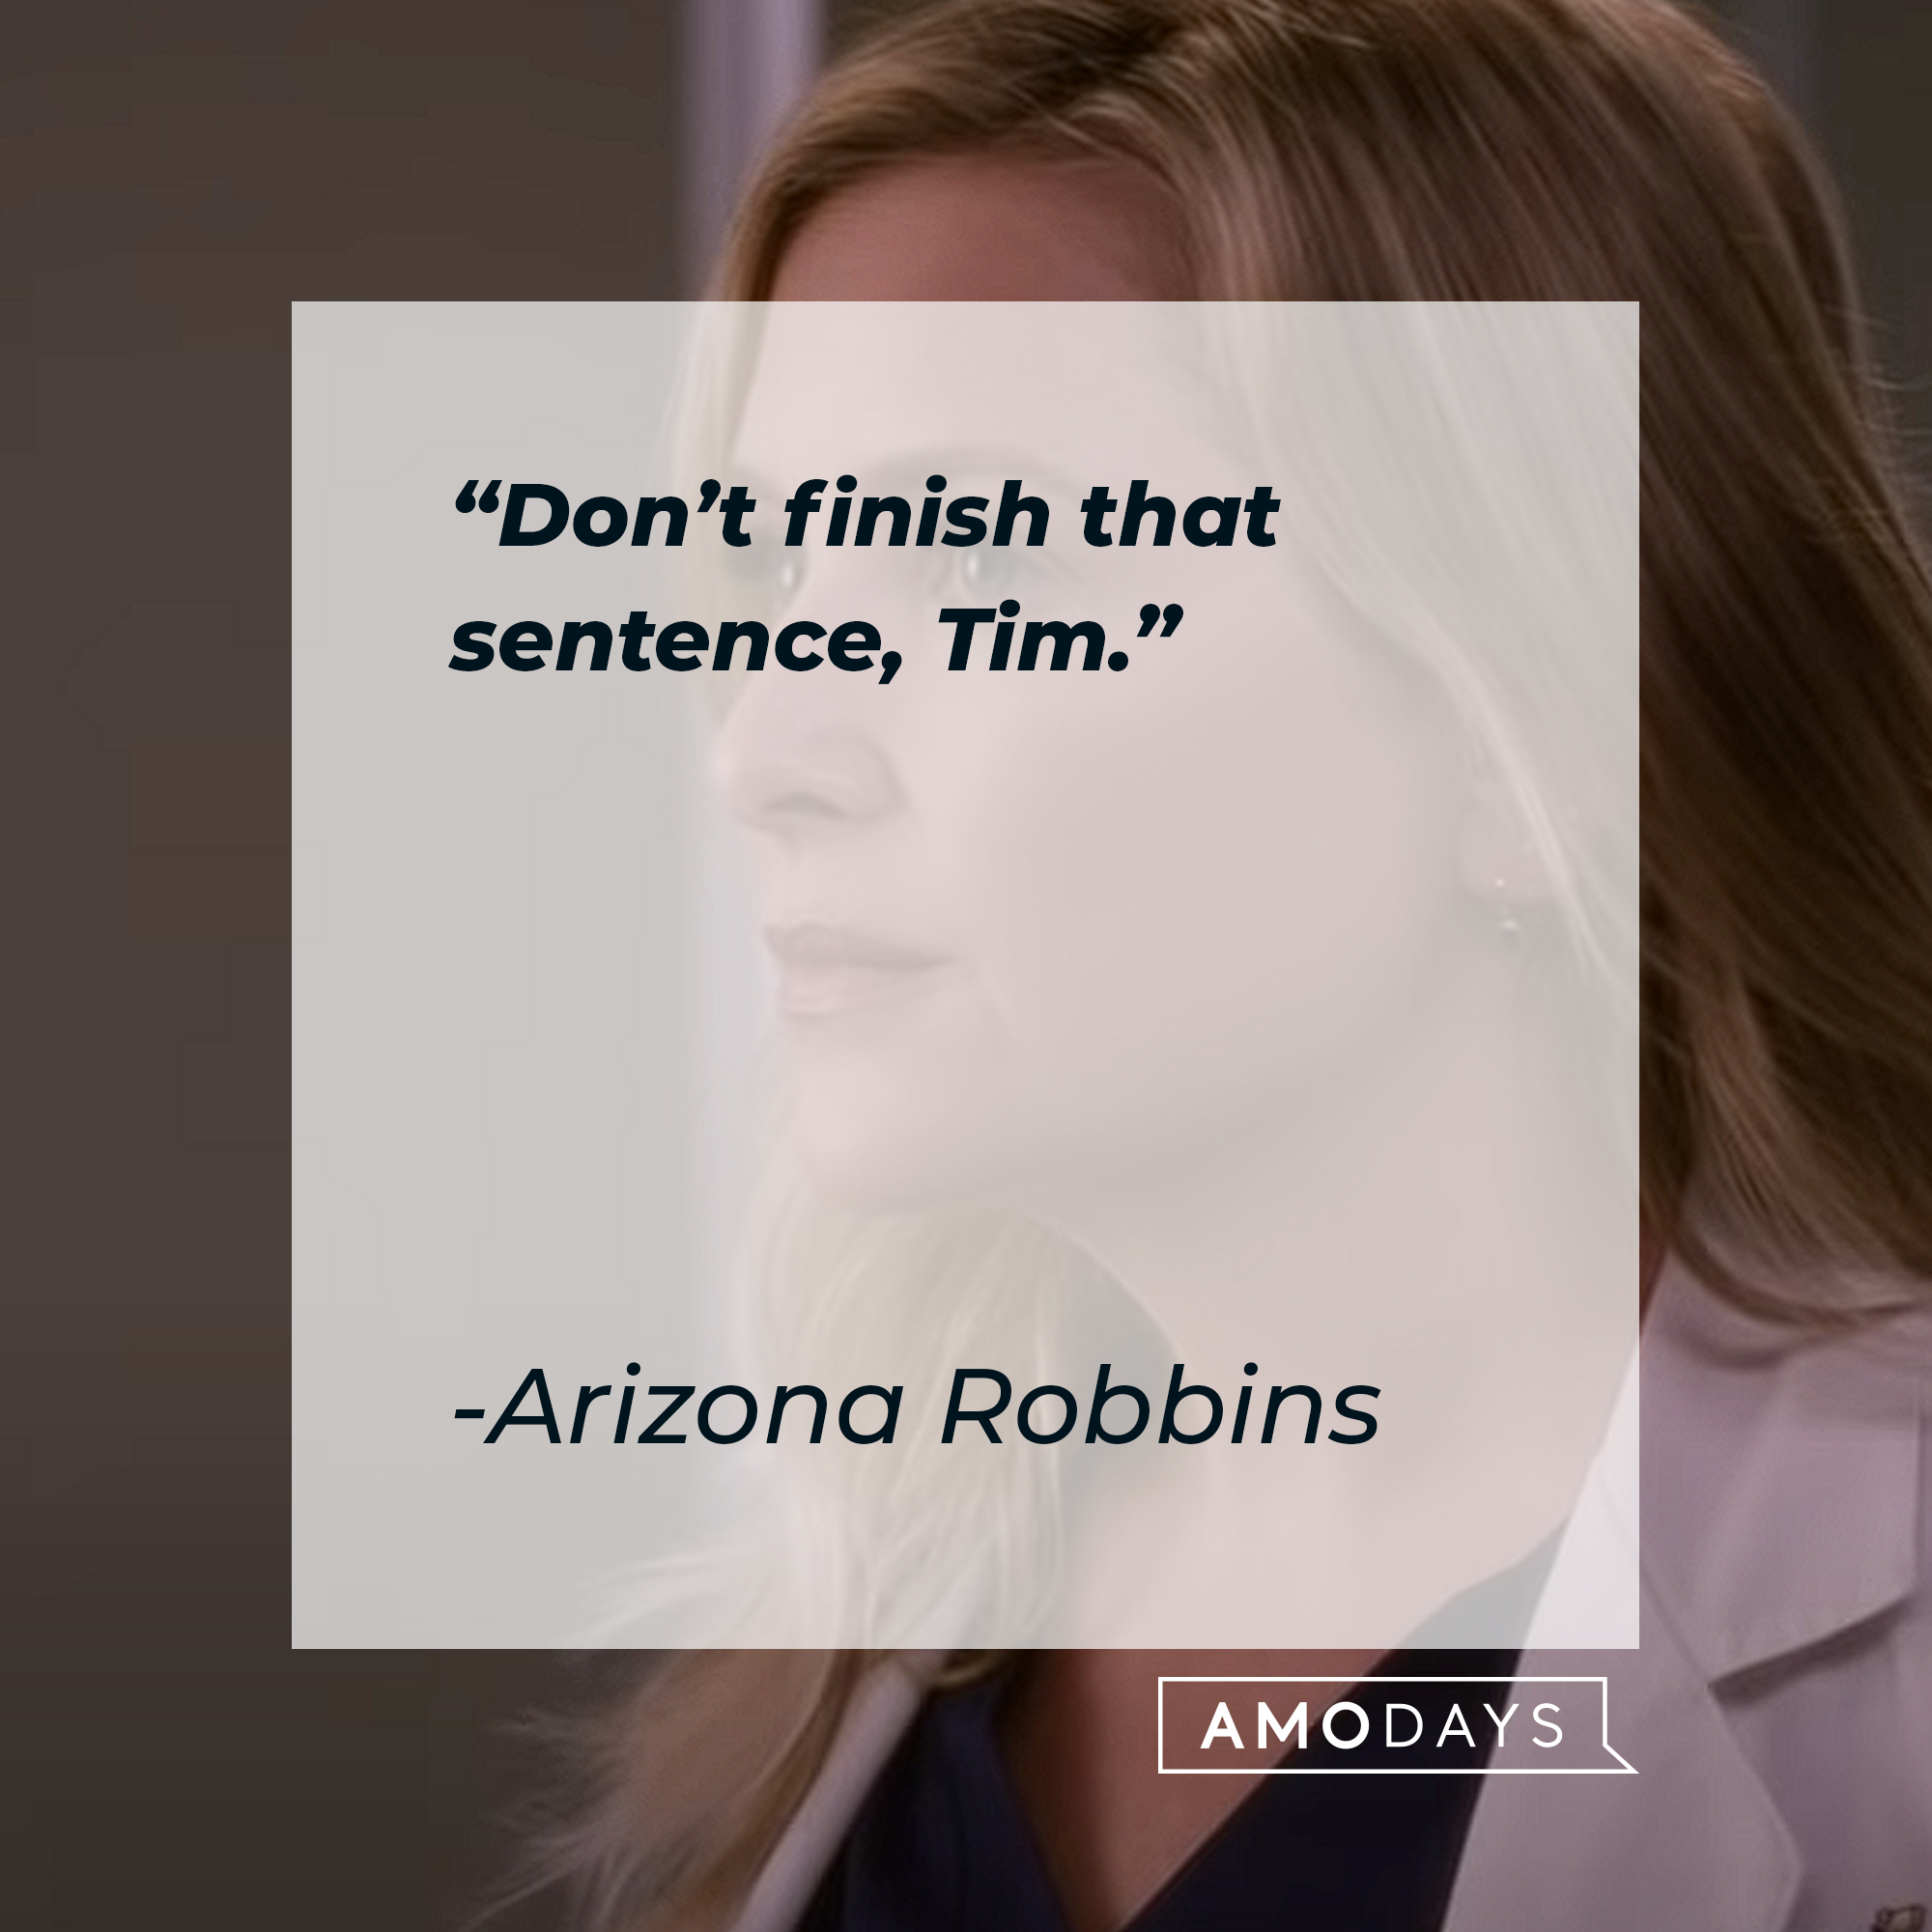 A picture of Arizona Robbins with her quote: “Don’t finish that sentence, Tim.” | Image: AmoDays